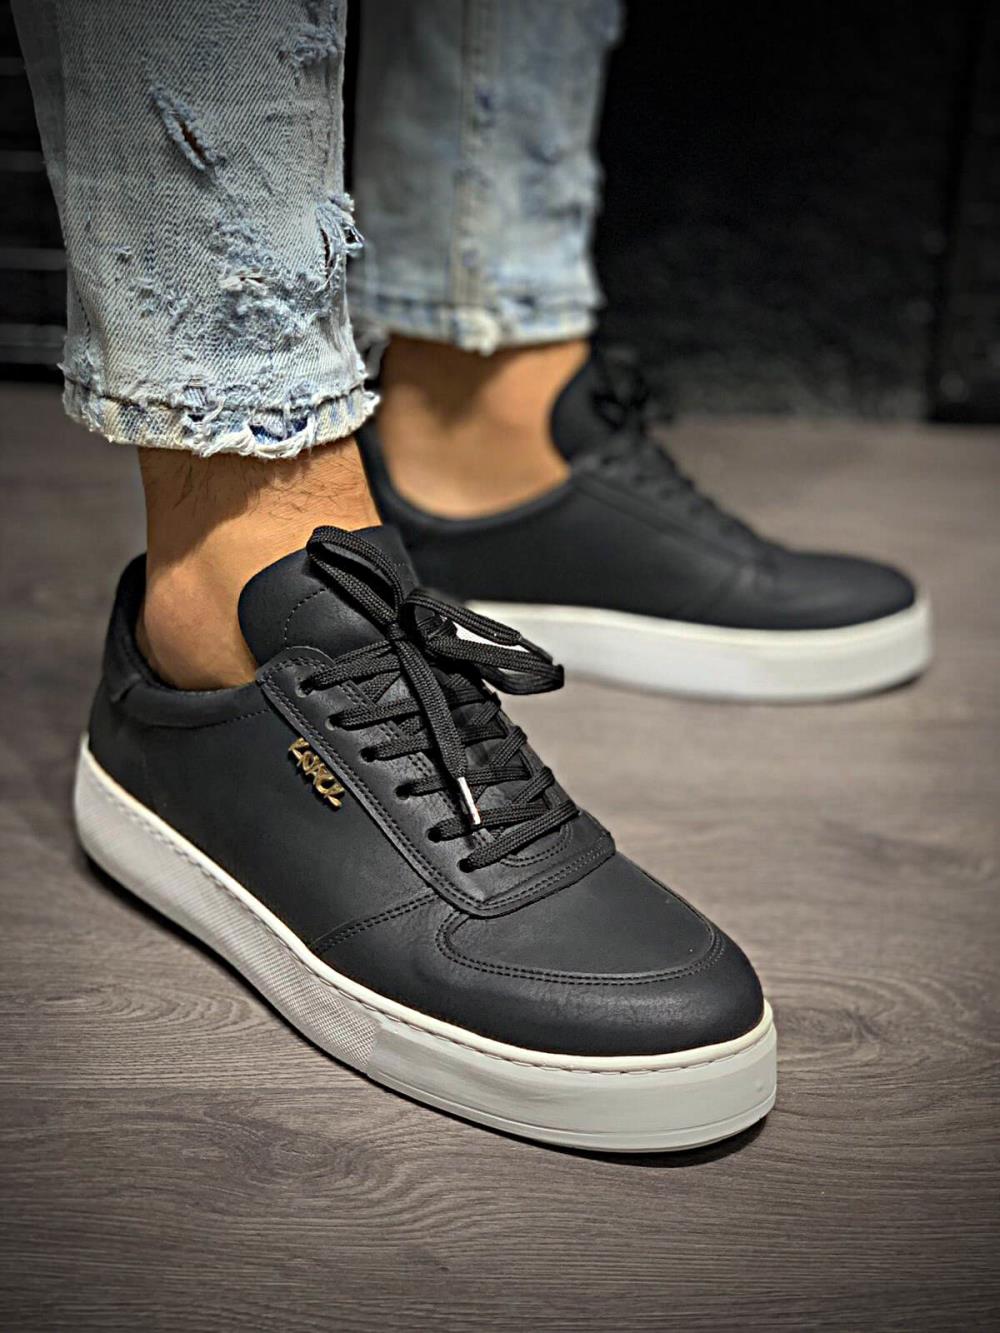 2021 Winter Season Men's Boots New Model Casual High-Sole Luxury Brand Trendy Artificial Leather Casual Design Lightweight Hiking Waterproof Sneakers Knack Everyday 666 Black (White bottom), Quality